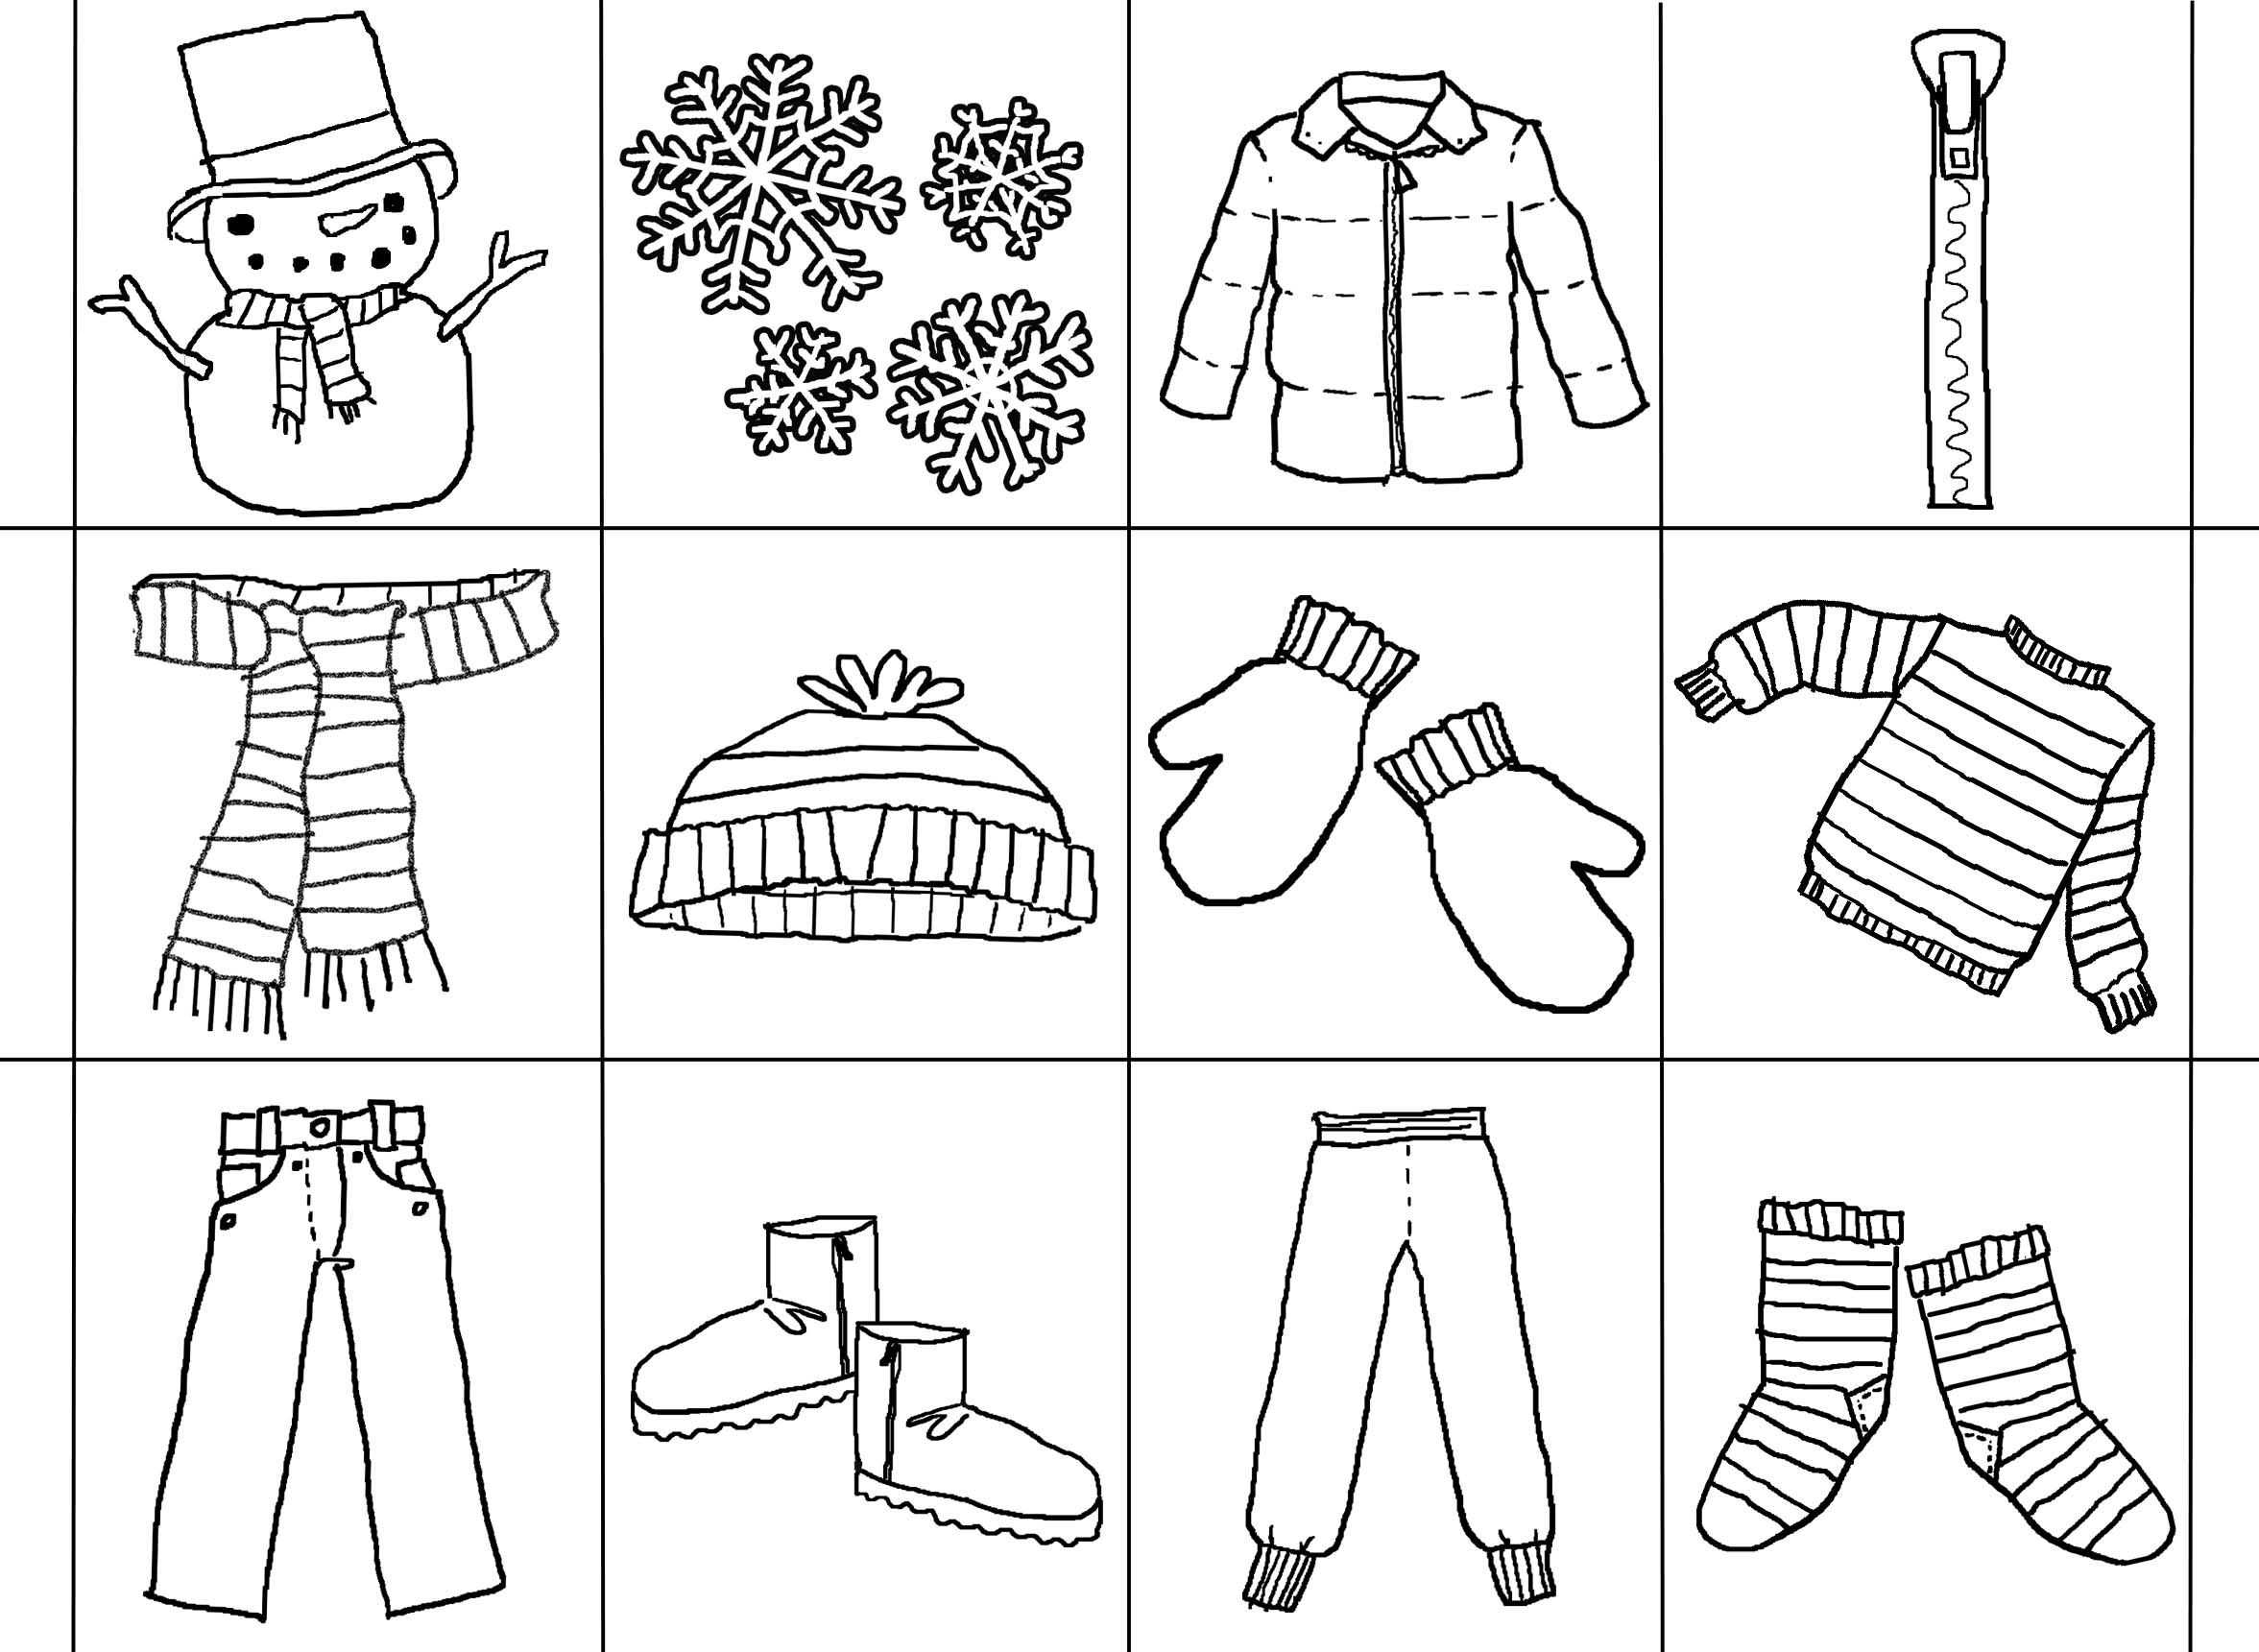 Worksheets for Children or the Jacket I Wear In the Snow Bingo